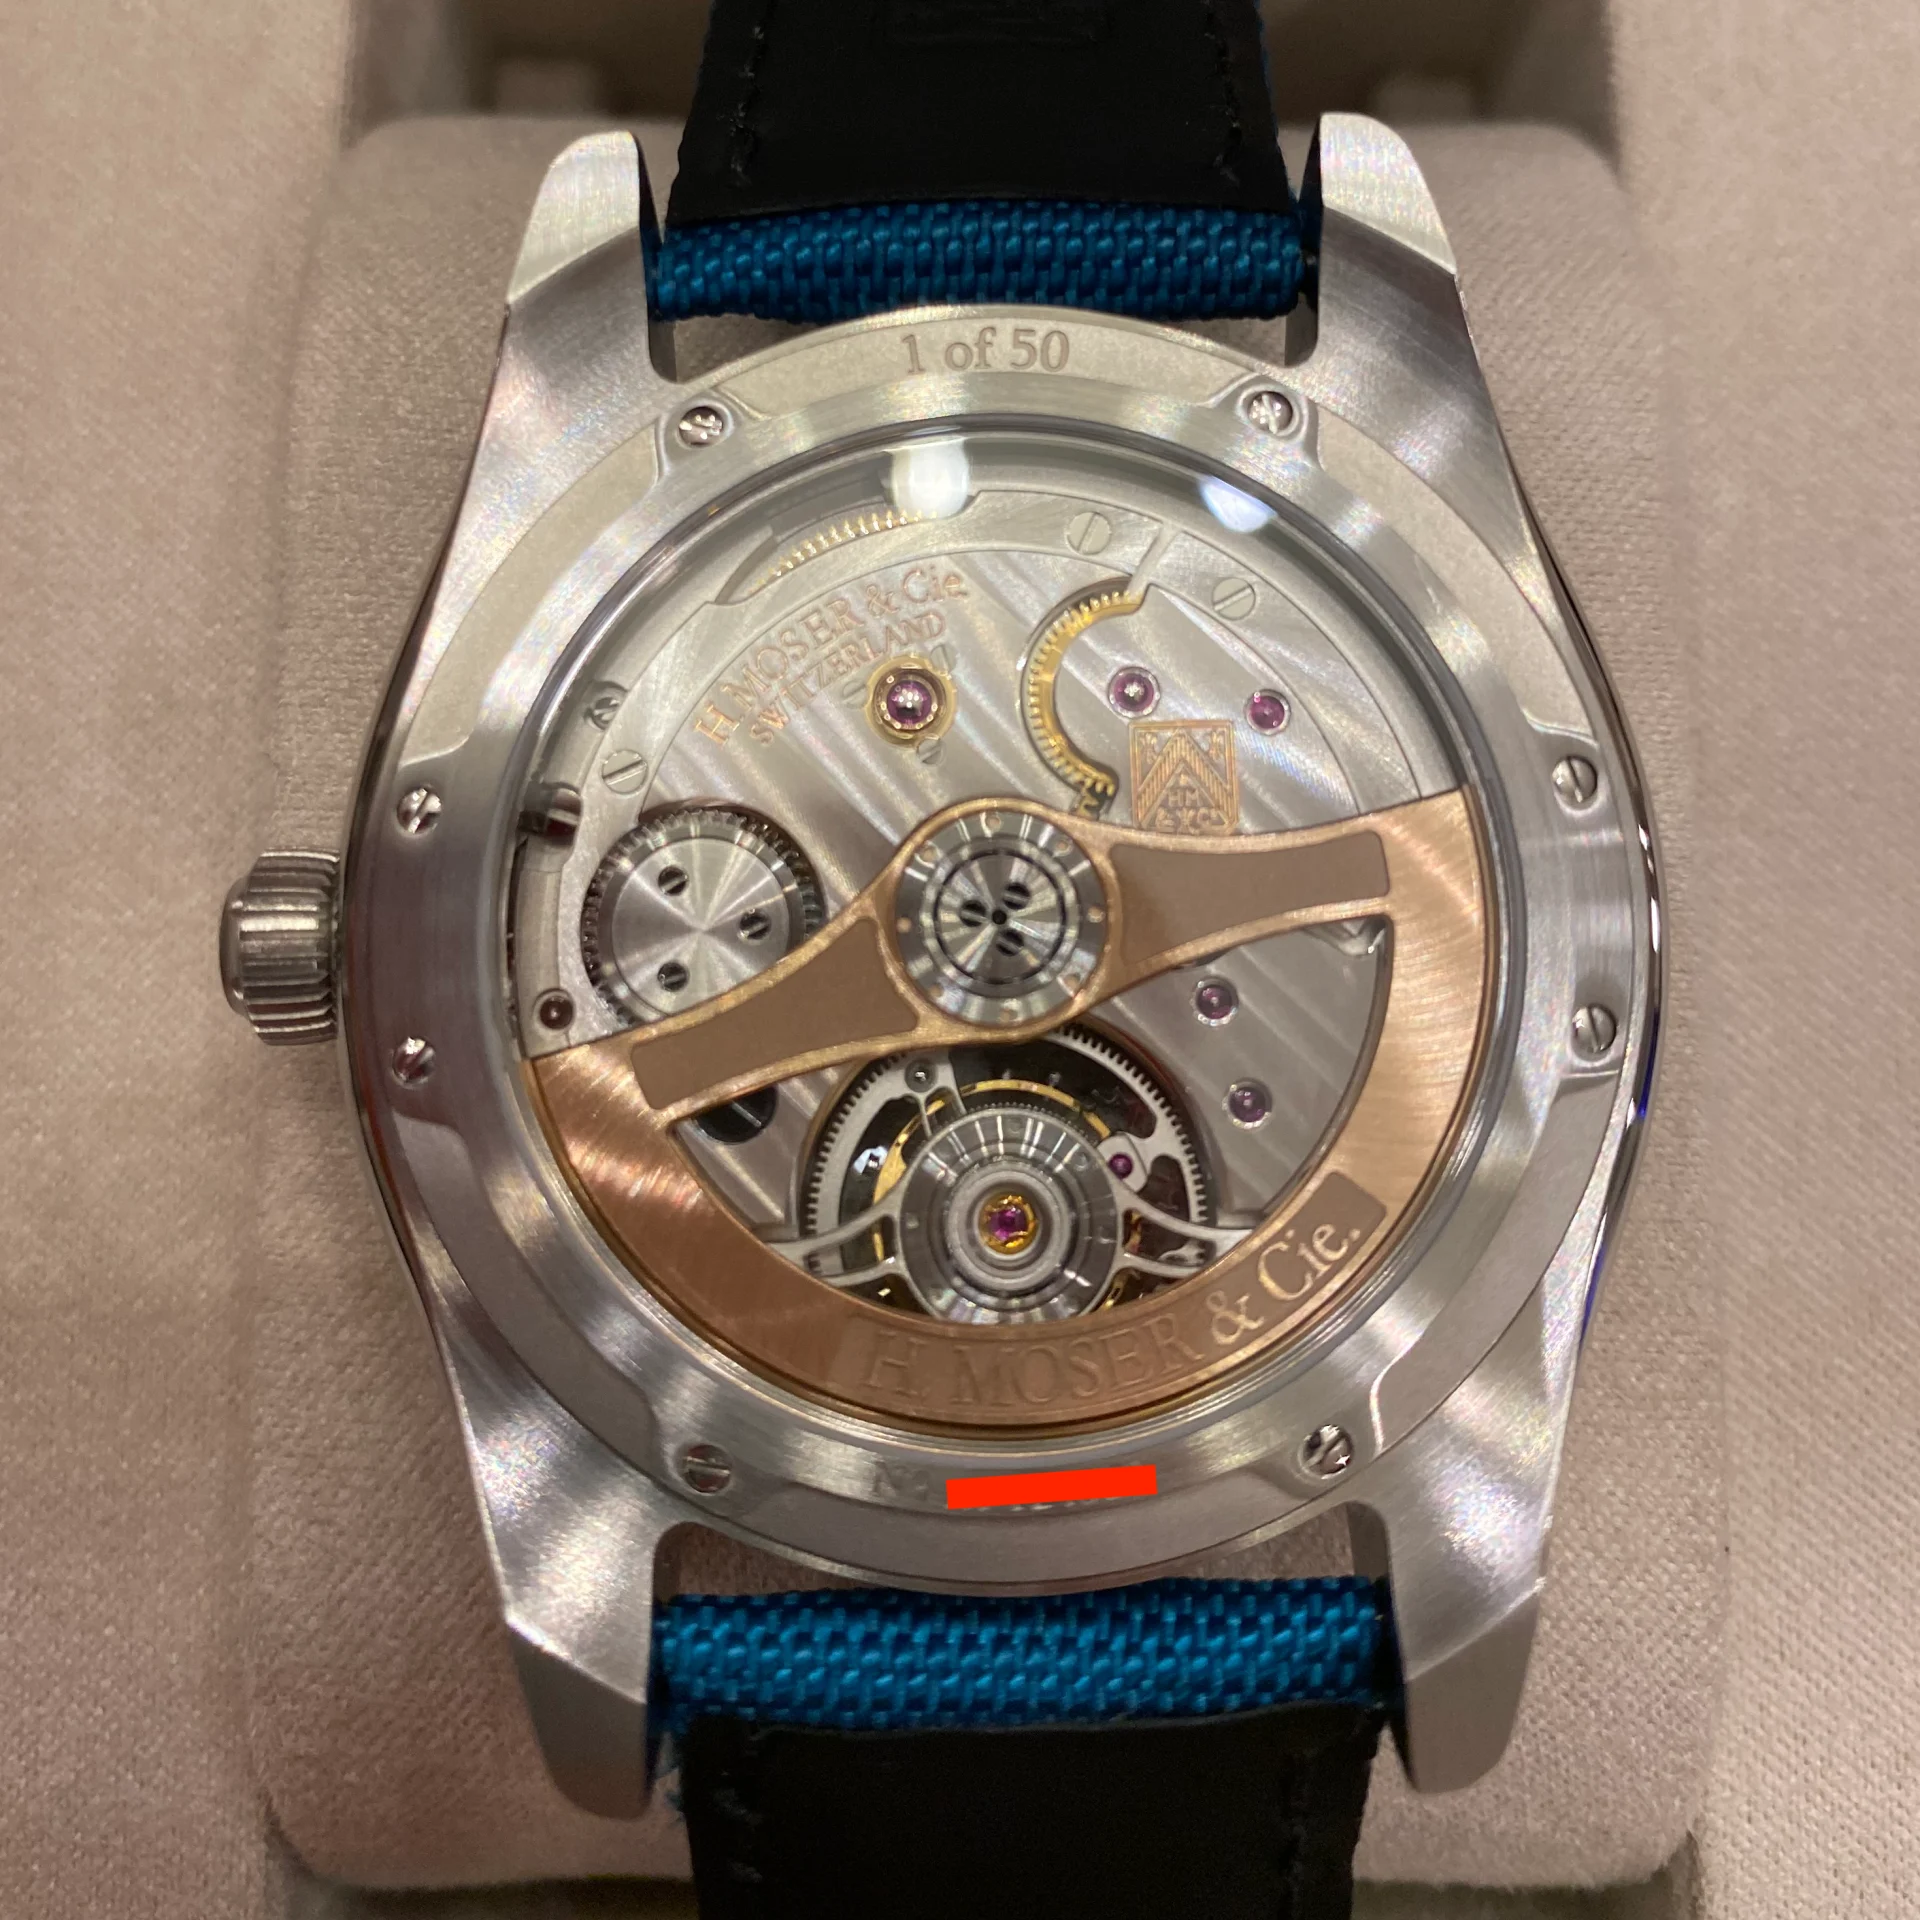 2022 H. Moser & Cie Pioneer Tourbillon Blue Lagoon Fumé - Limited to 50 Pieces 3804-1205 Listing Image 2